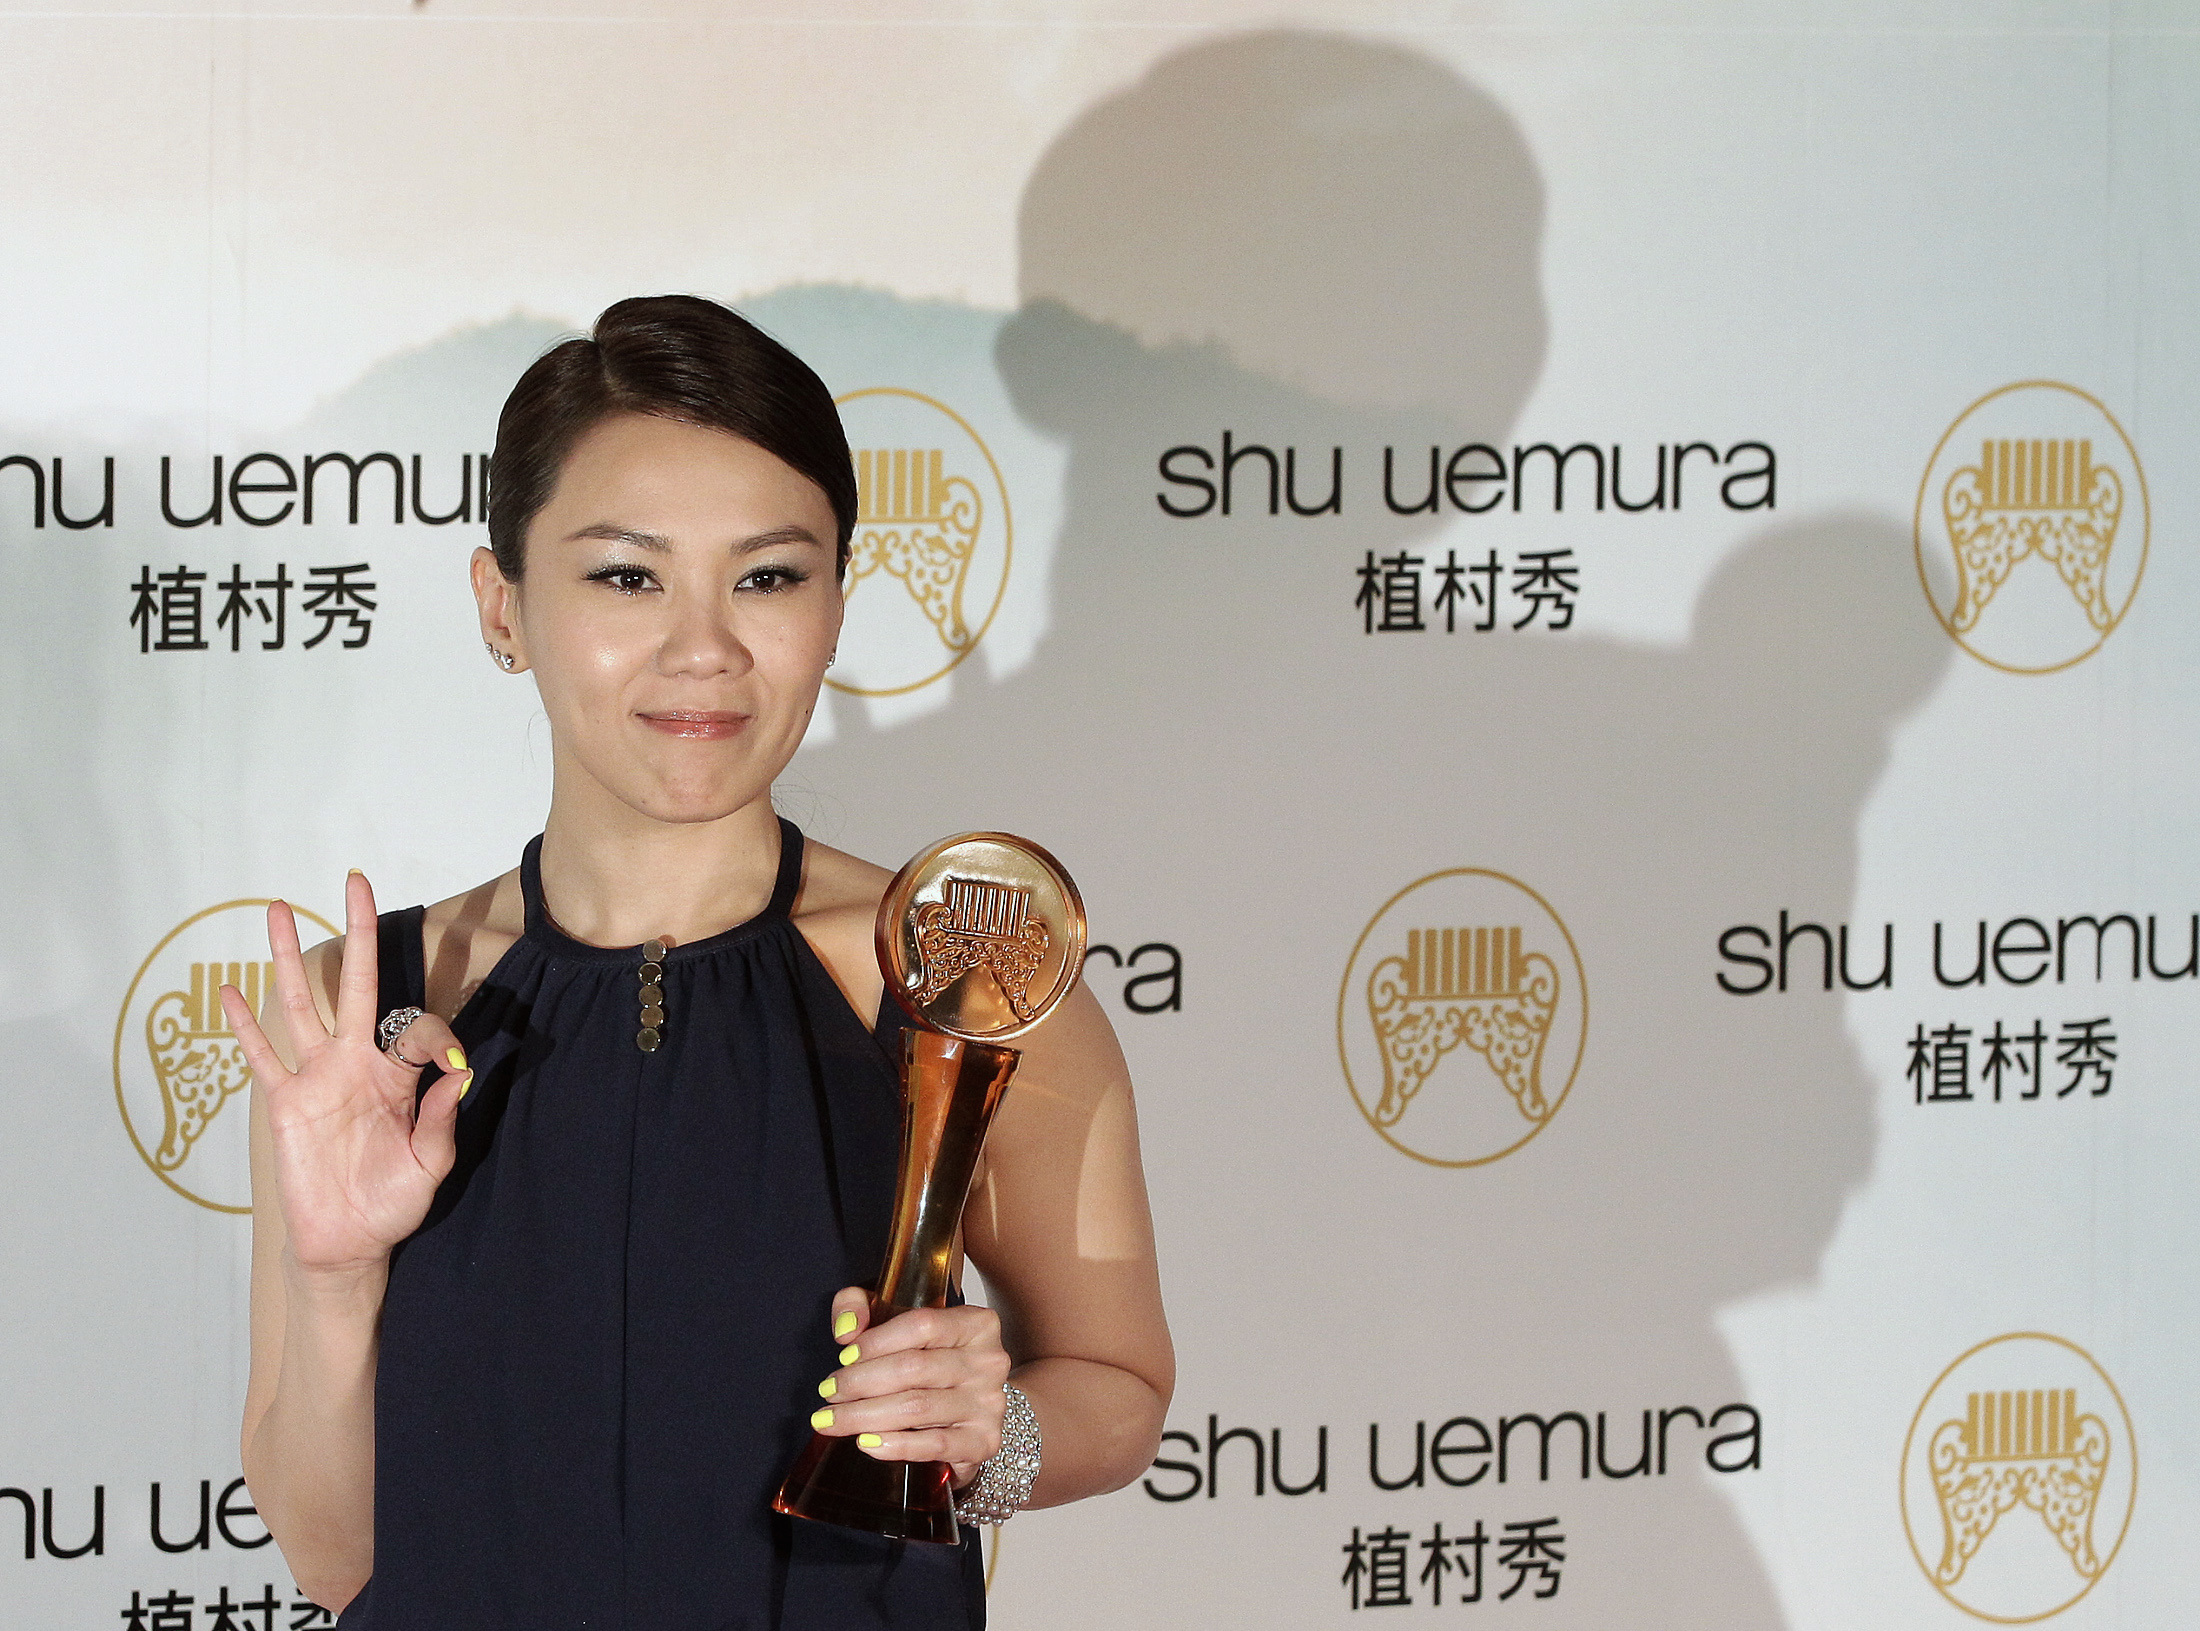 Singer Tanya Chua of Singapore poses after winning the Best Female Artist in Mandarin category at the 23rd Golden Melody Awards in Taipei